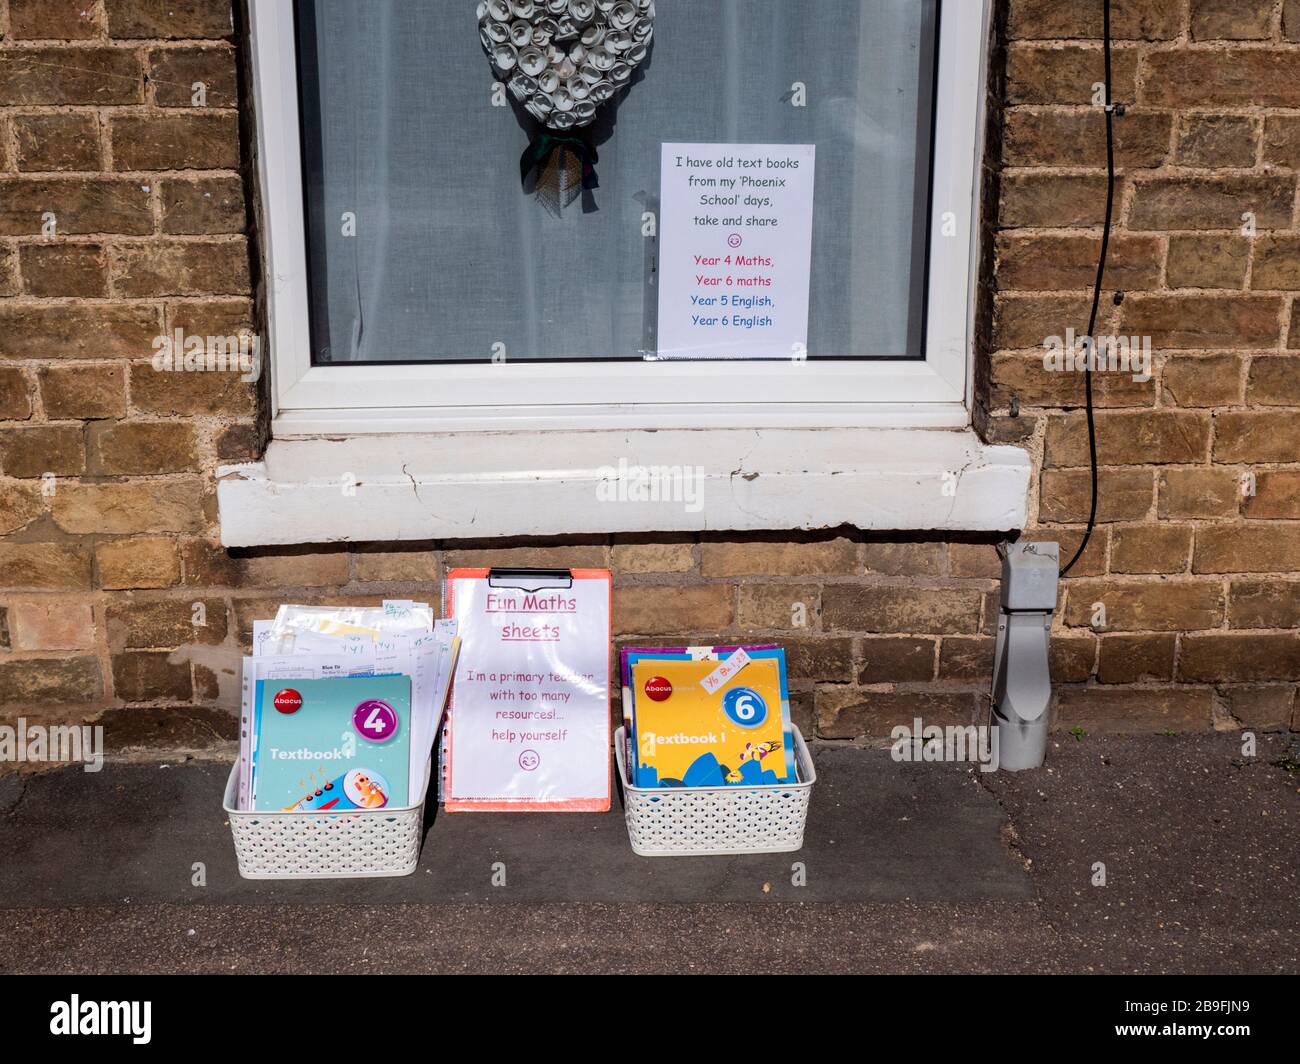 Willingham Cambridgeshire, UK. 24th Mar, 2020. A community minded teacher offers free books and resources outside their house to help people with home schooling while children are off school because of the Coronavirus shut down. This is the morning after the night people across the UK were told to stay at home to restrict the spread of the Covid 19 virus. Credit: Julian Eales/Alamy Live News Stock Photo